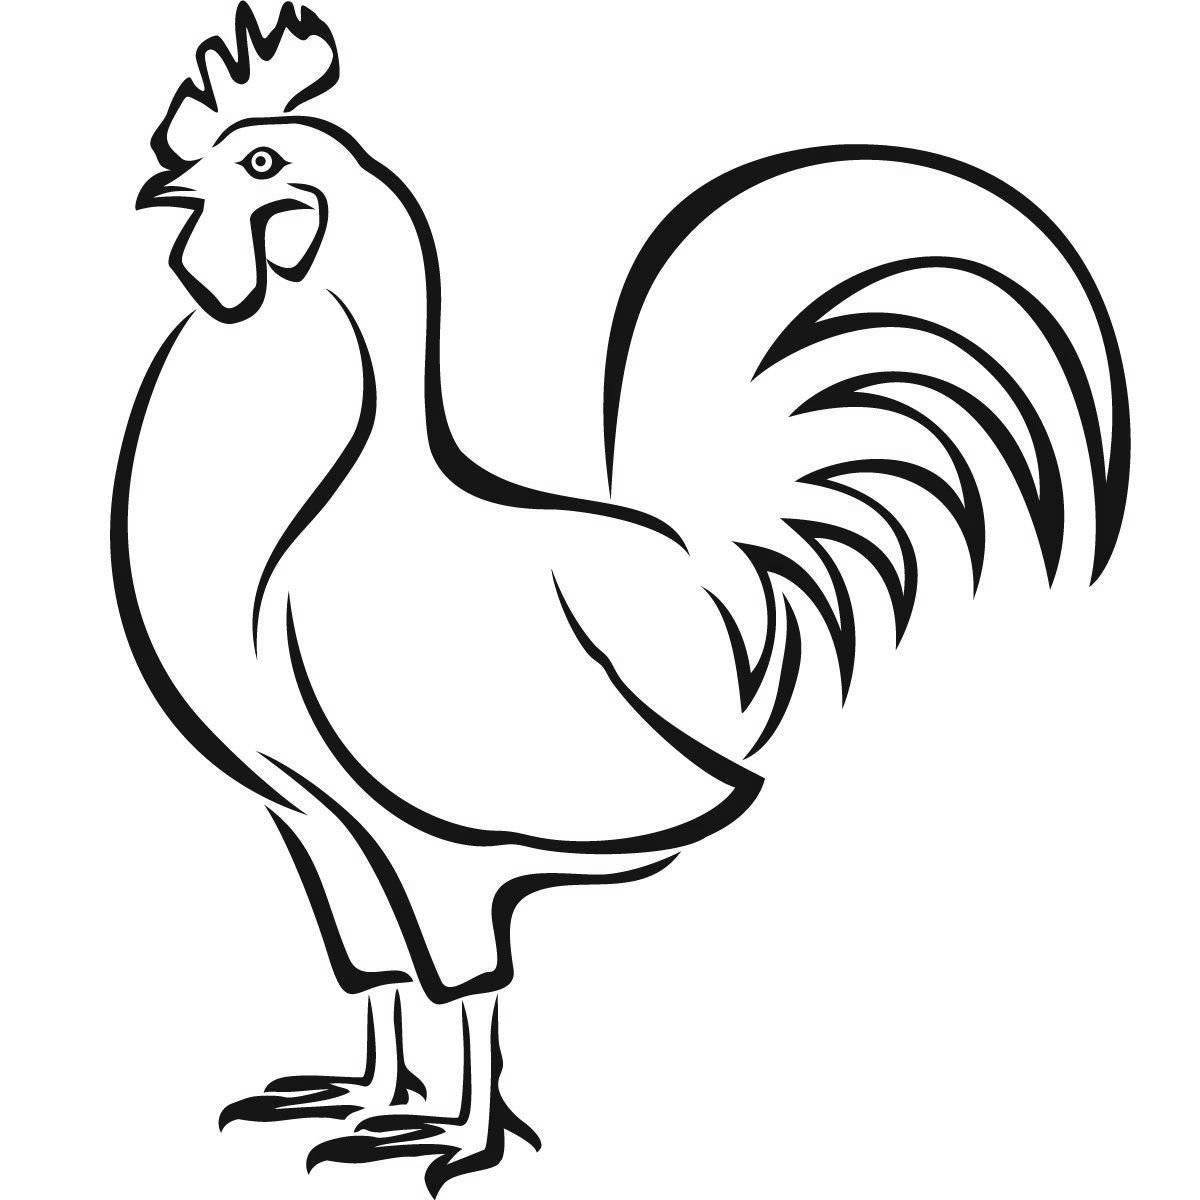 Awesome rooster coloring page